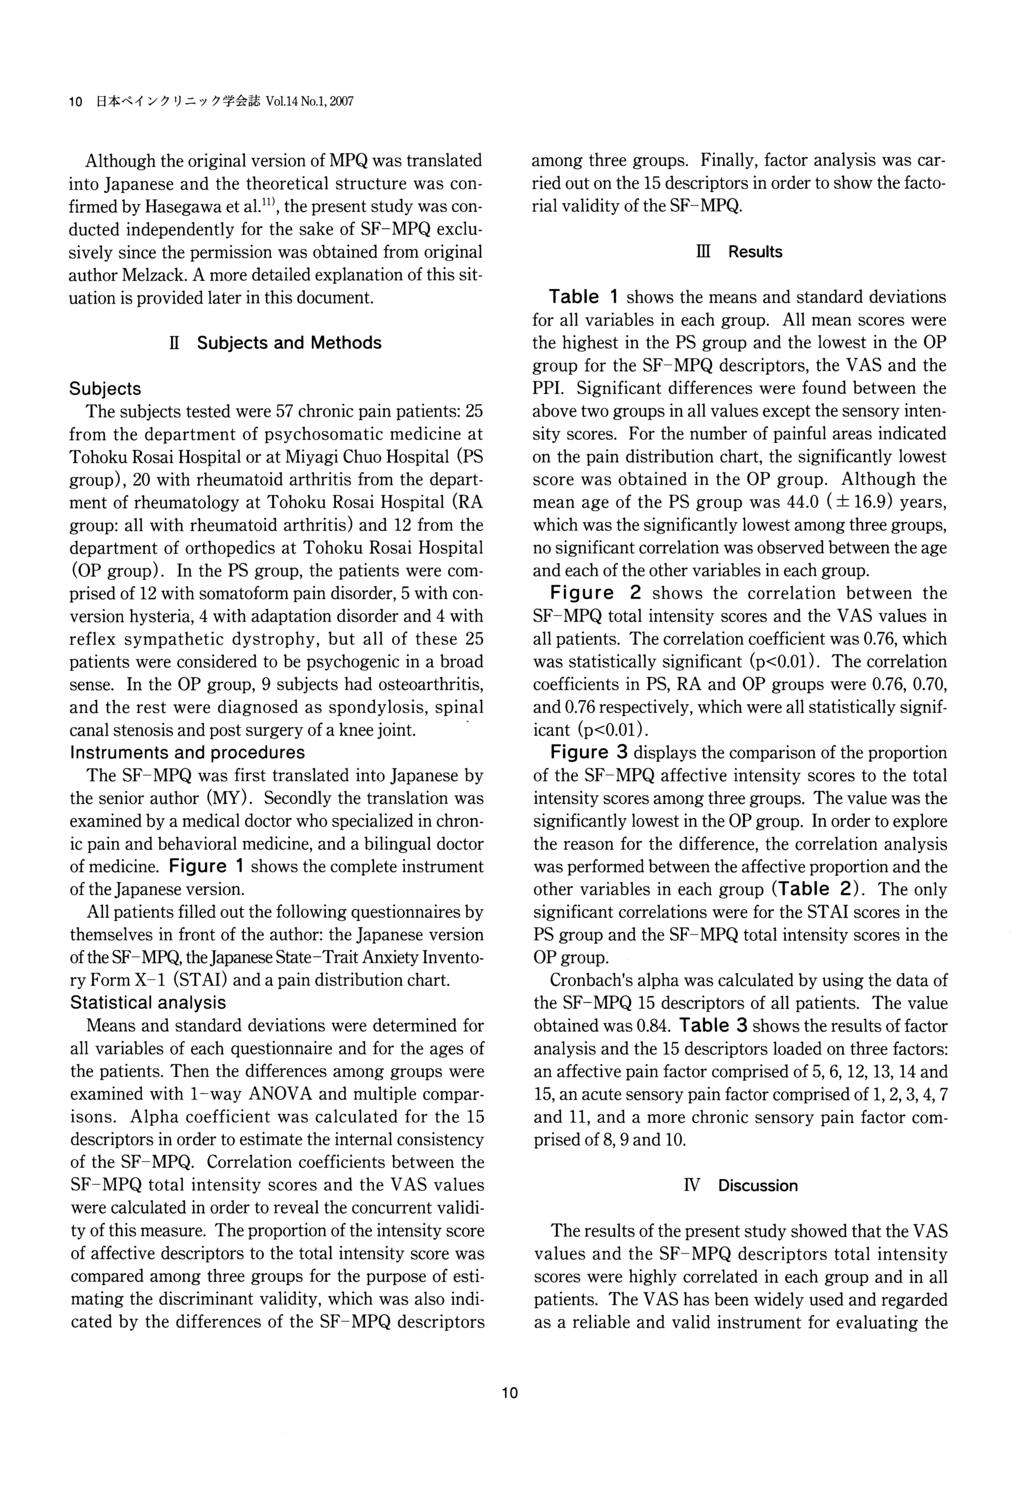 Vol.14 No.1, 2007 Although the original version of MPQ was translated into Japanese and the theoretical structure was confirmed by Hasegawa et al.